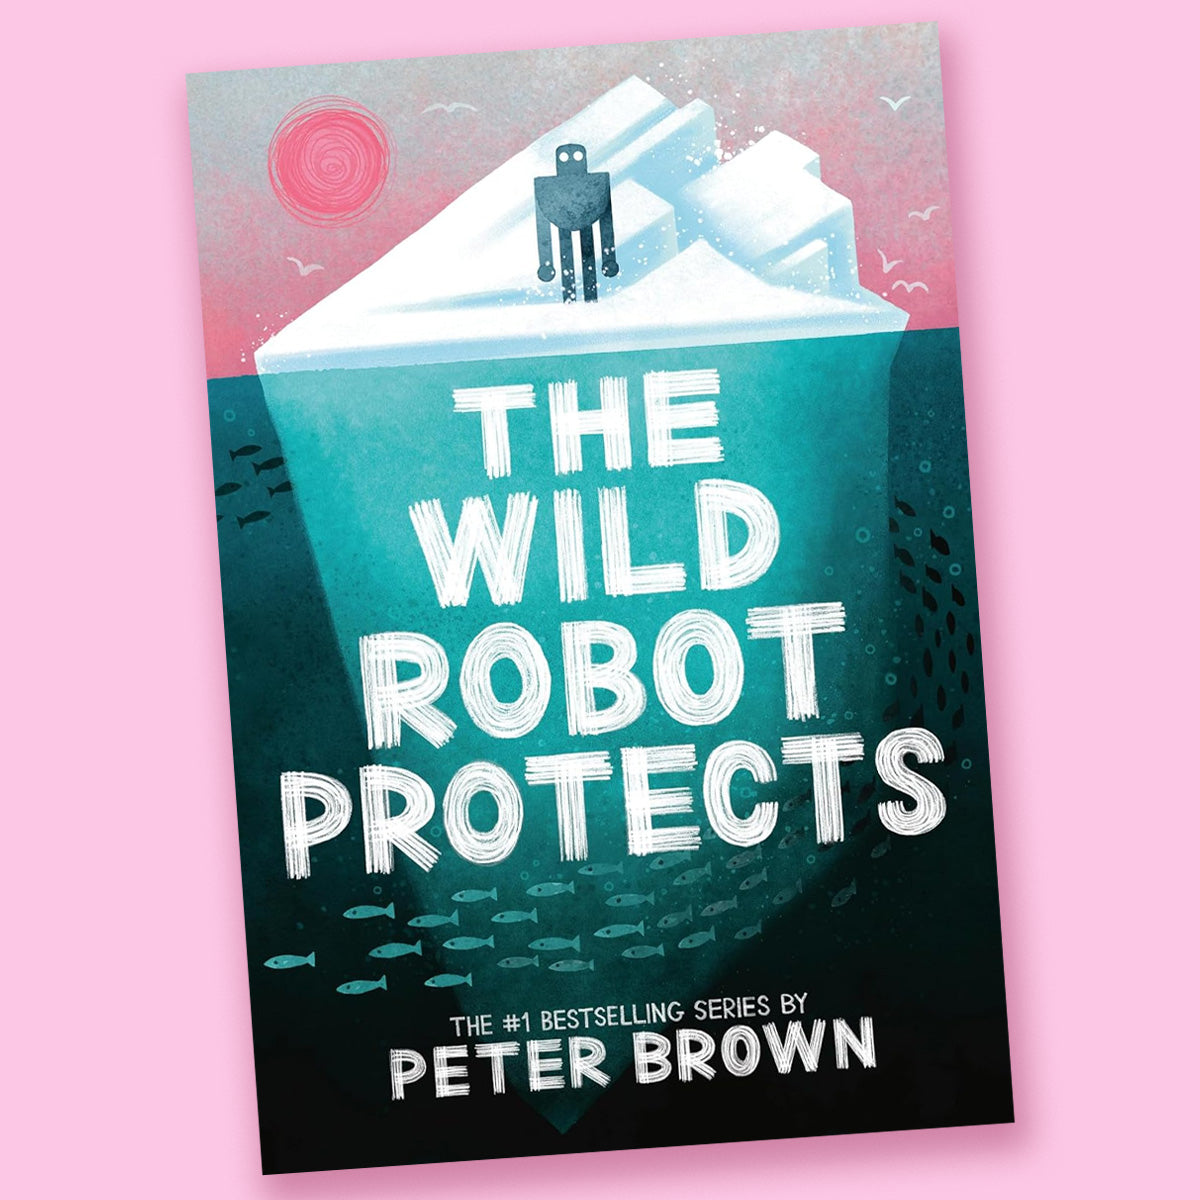 The Wild Robot Protects (Volume 3) by Peter Brown